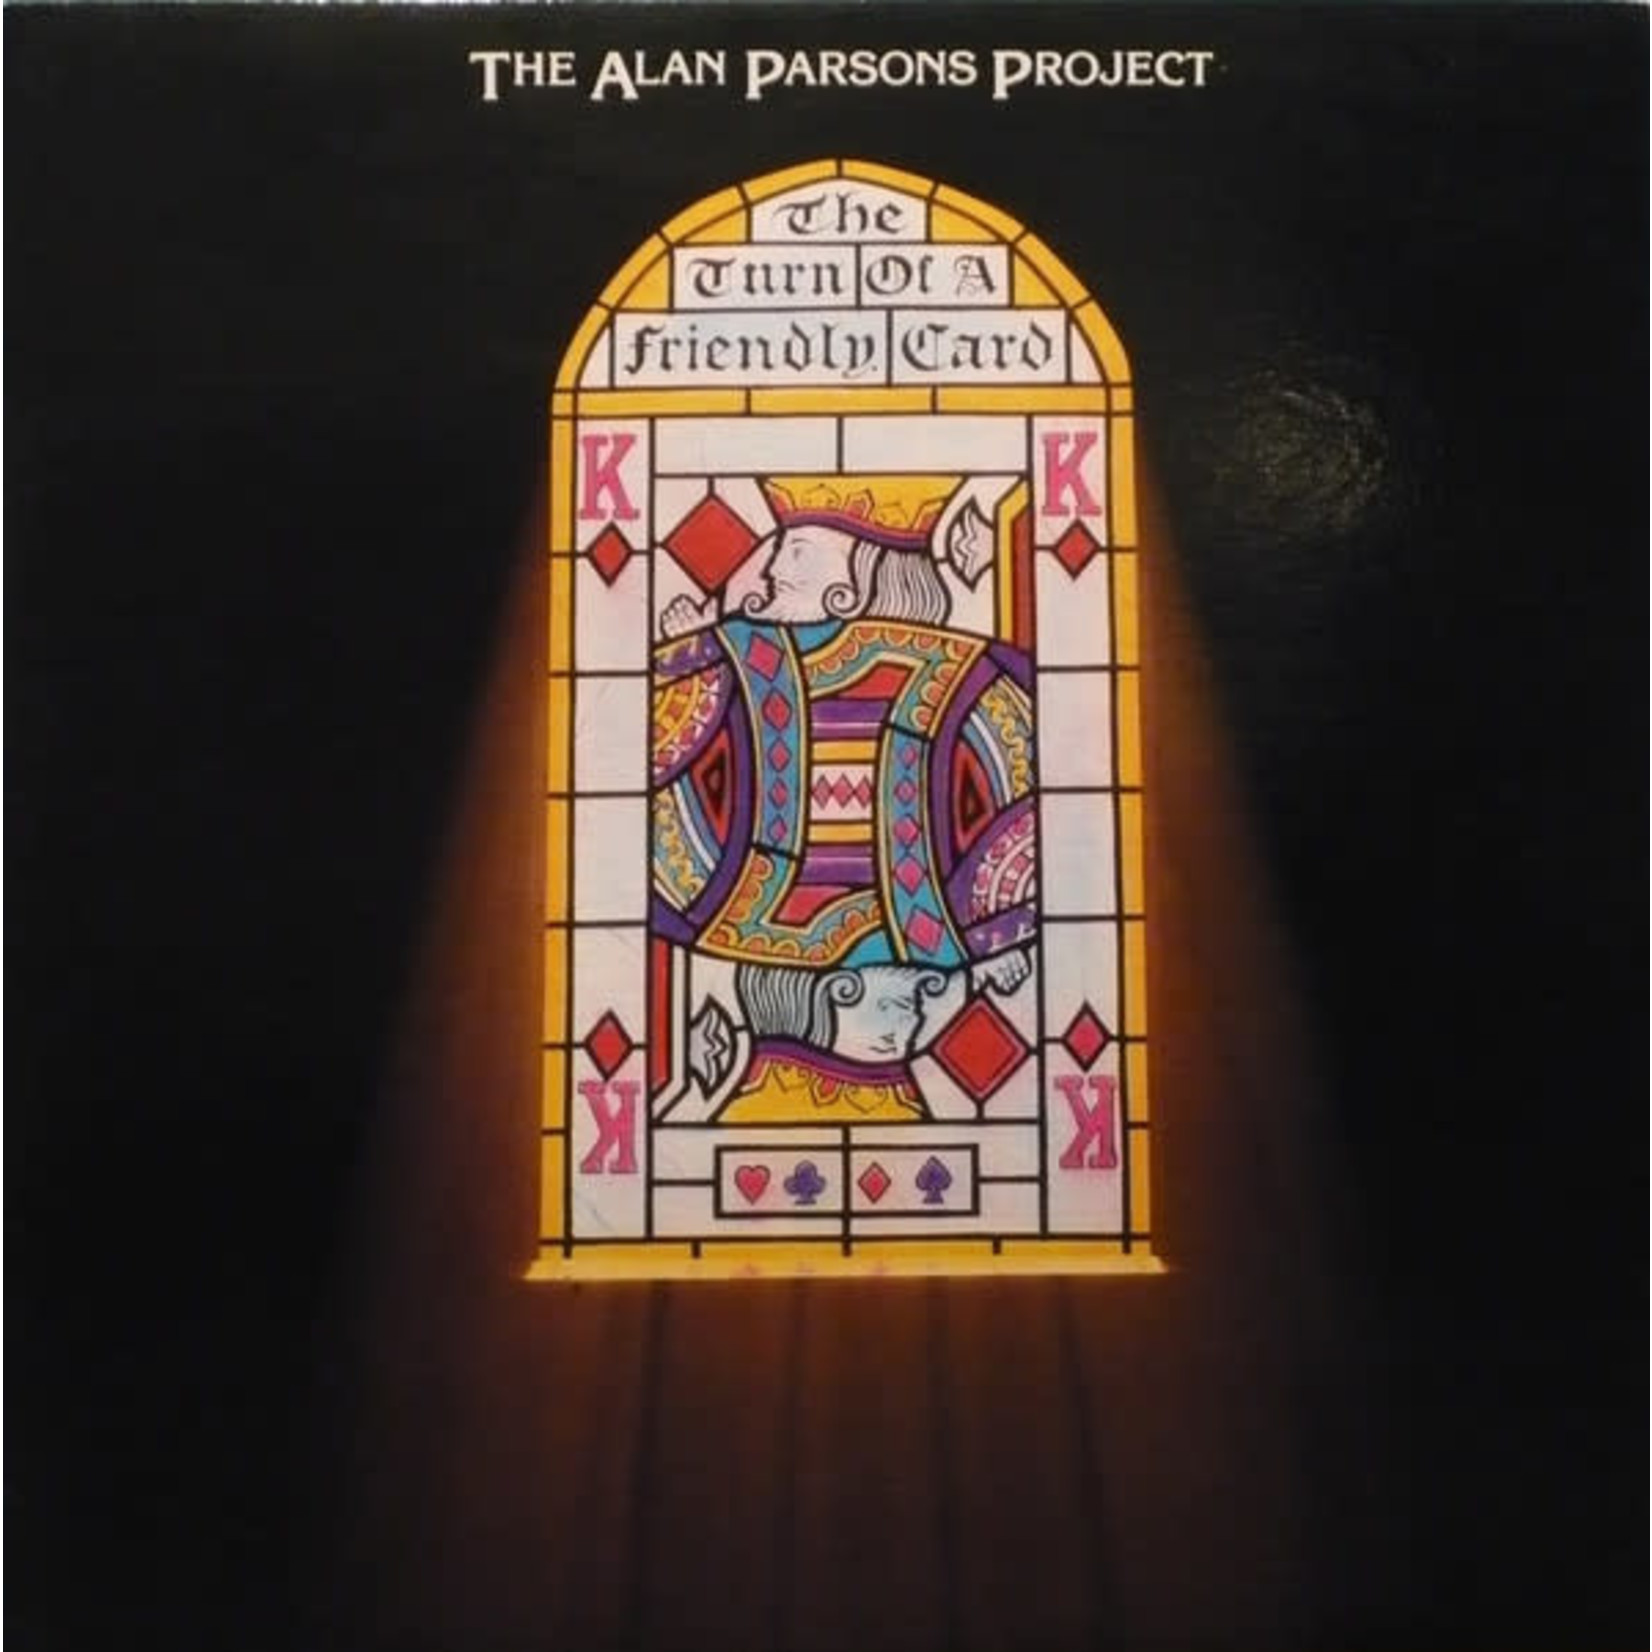 The Alan Parsons Project The Alan Parsons Project - The Turn Of A Friendly Card (VG, 1980, LP, Arista – AL 9518)